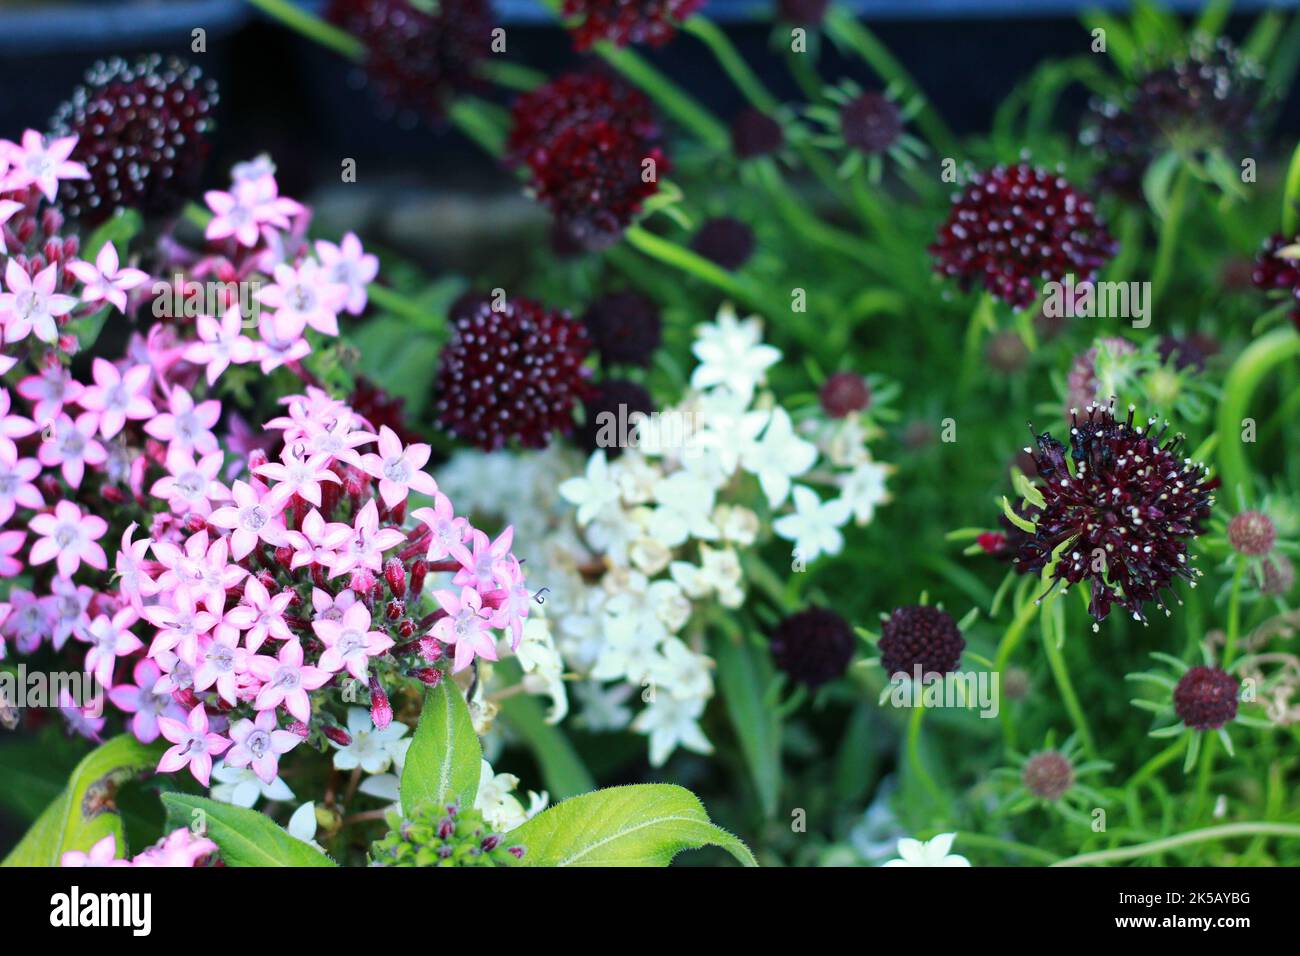 A beautiful floral background of lavender starclusters, Pentas lanceolata and Scabiosa flowerheads Stock Photo